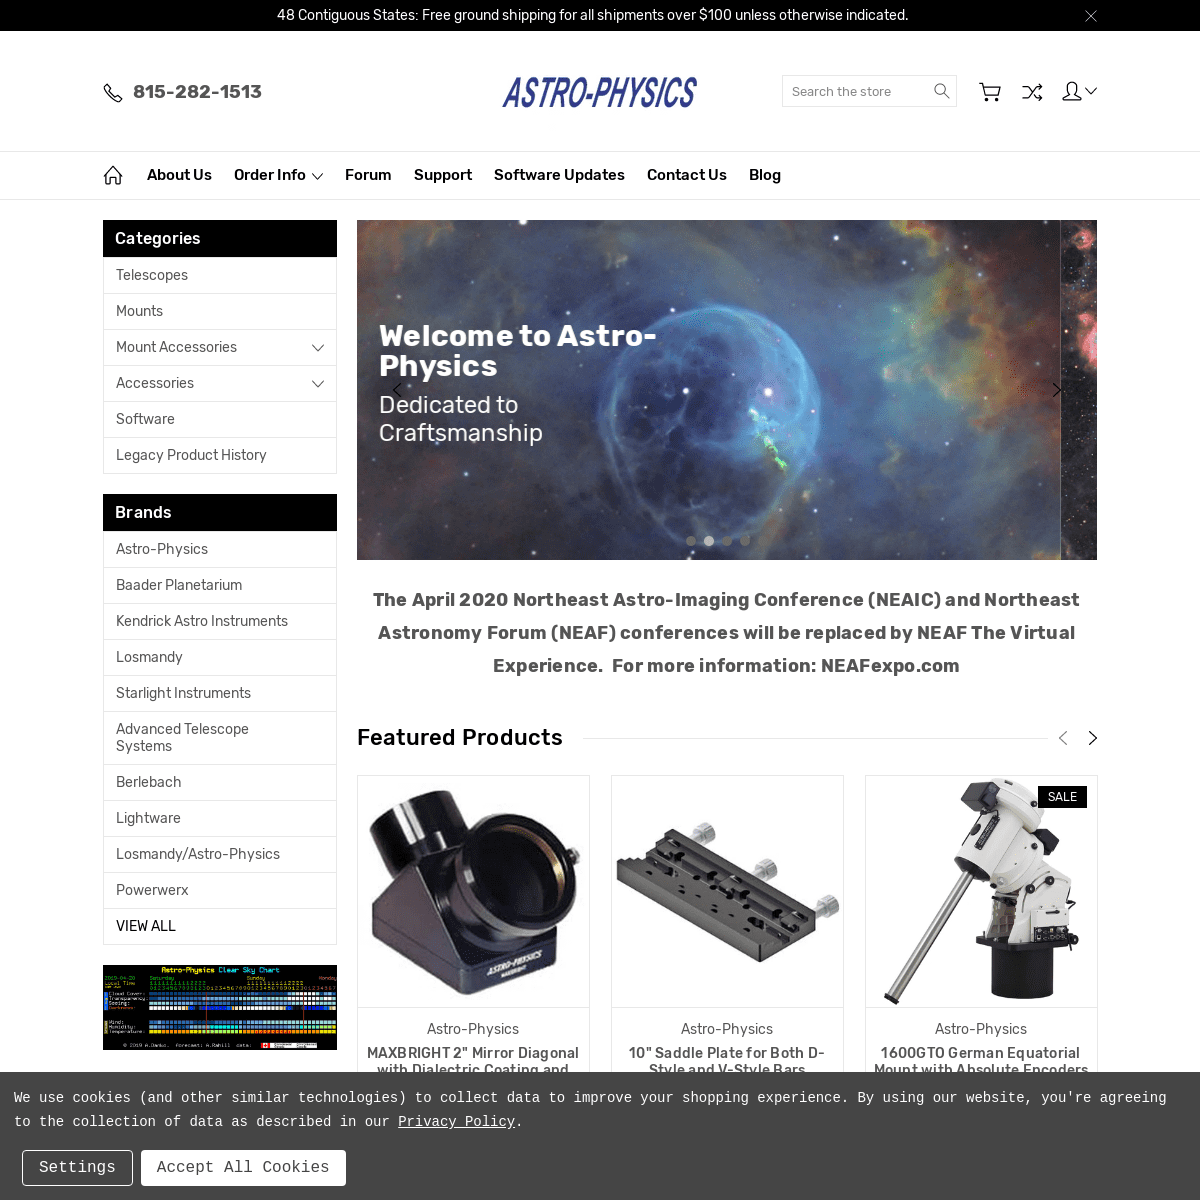 A complete backup of astro-physics.com